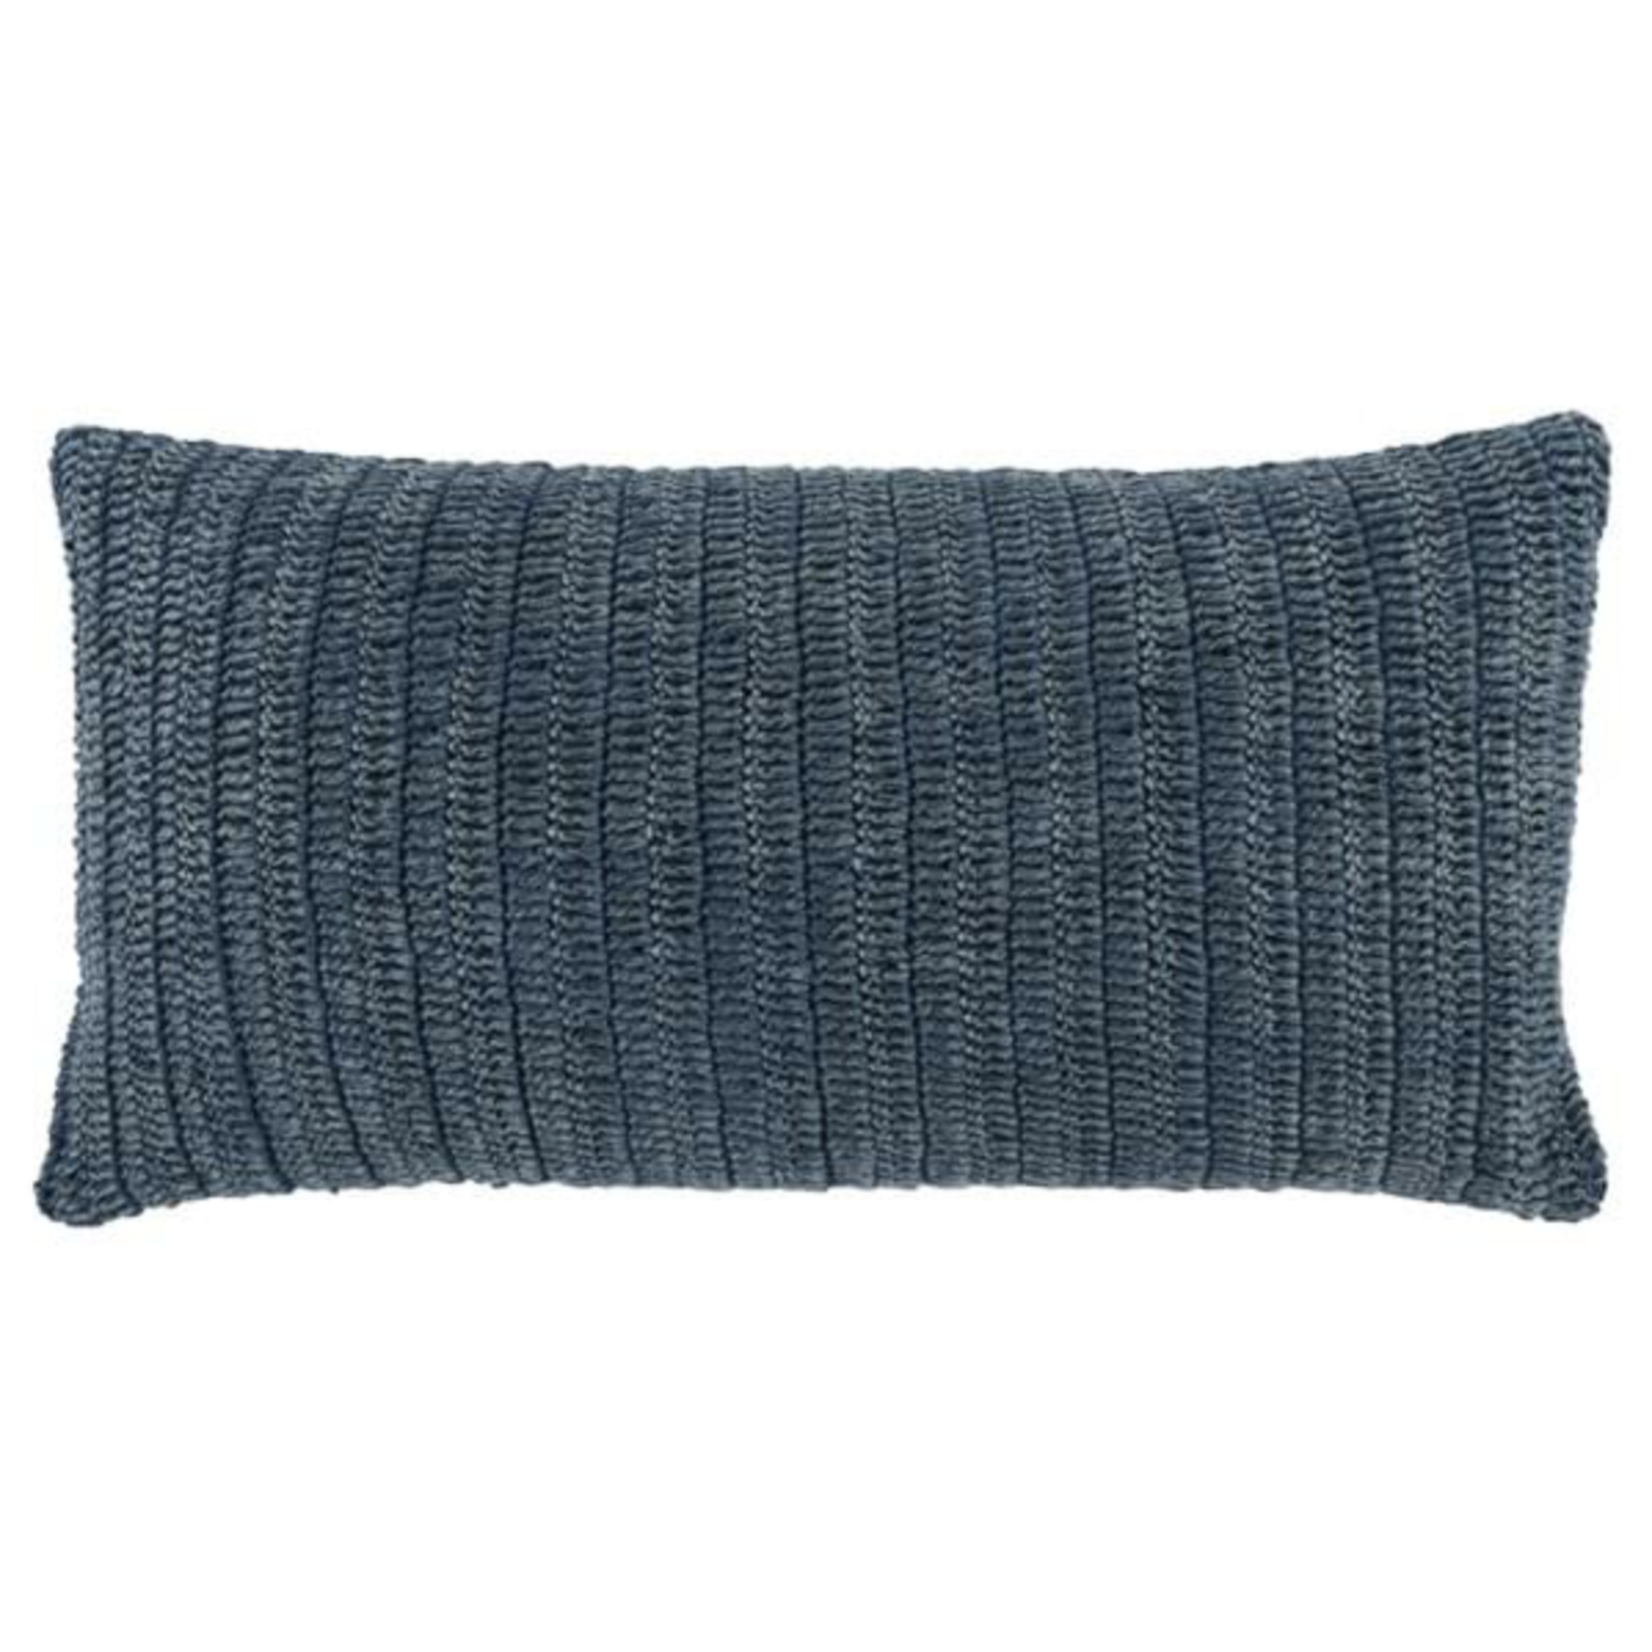 Outside The Box 26x14 SLD Rina Blue Hand-knitted 100% Belgian Flax Linen Pillow